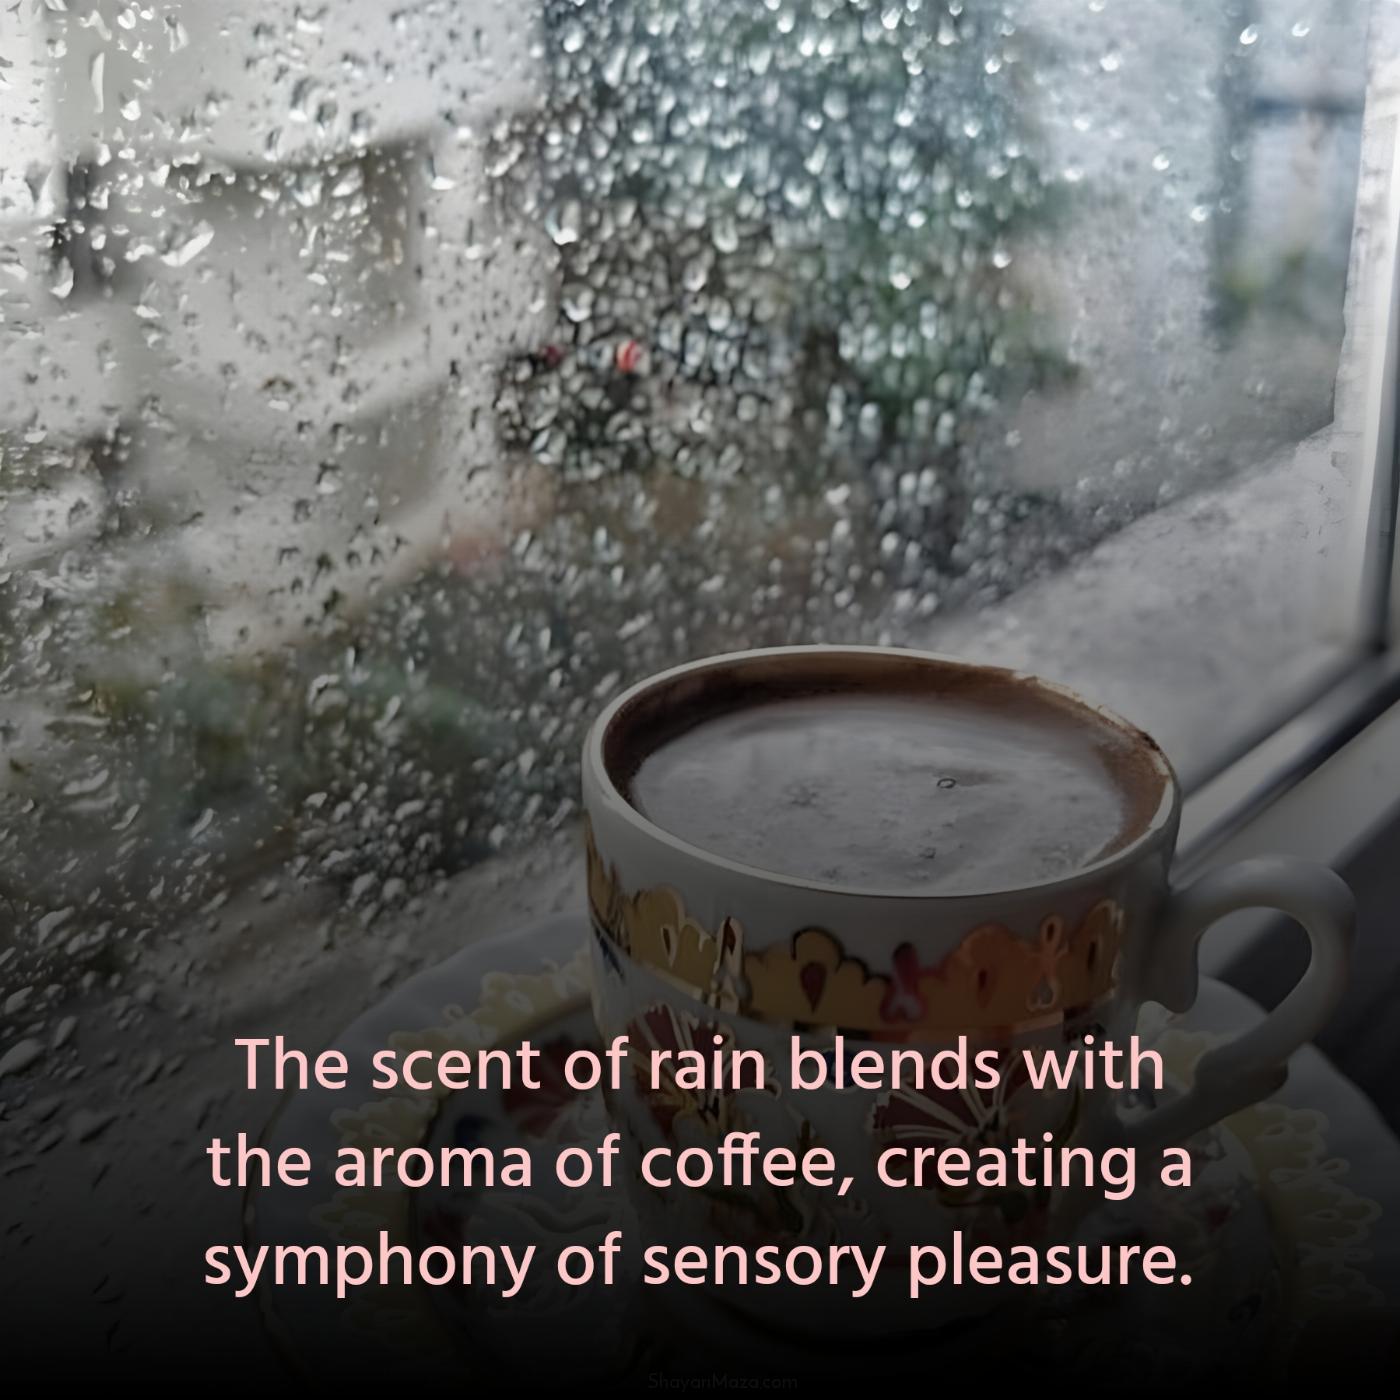 The scent of rain blends with the aroma of coffee